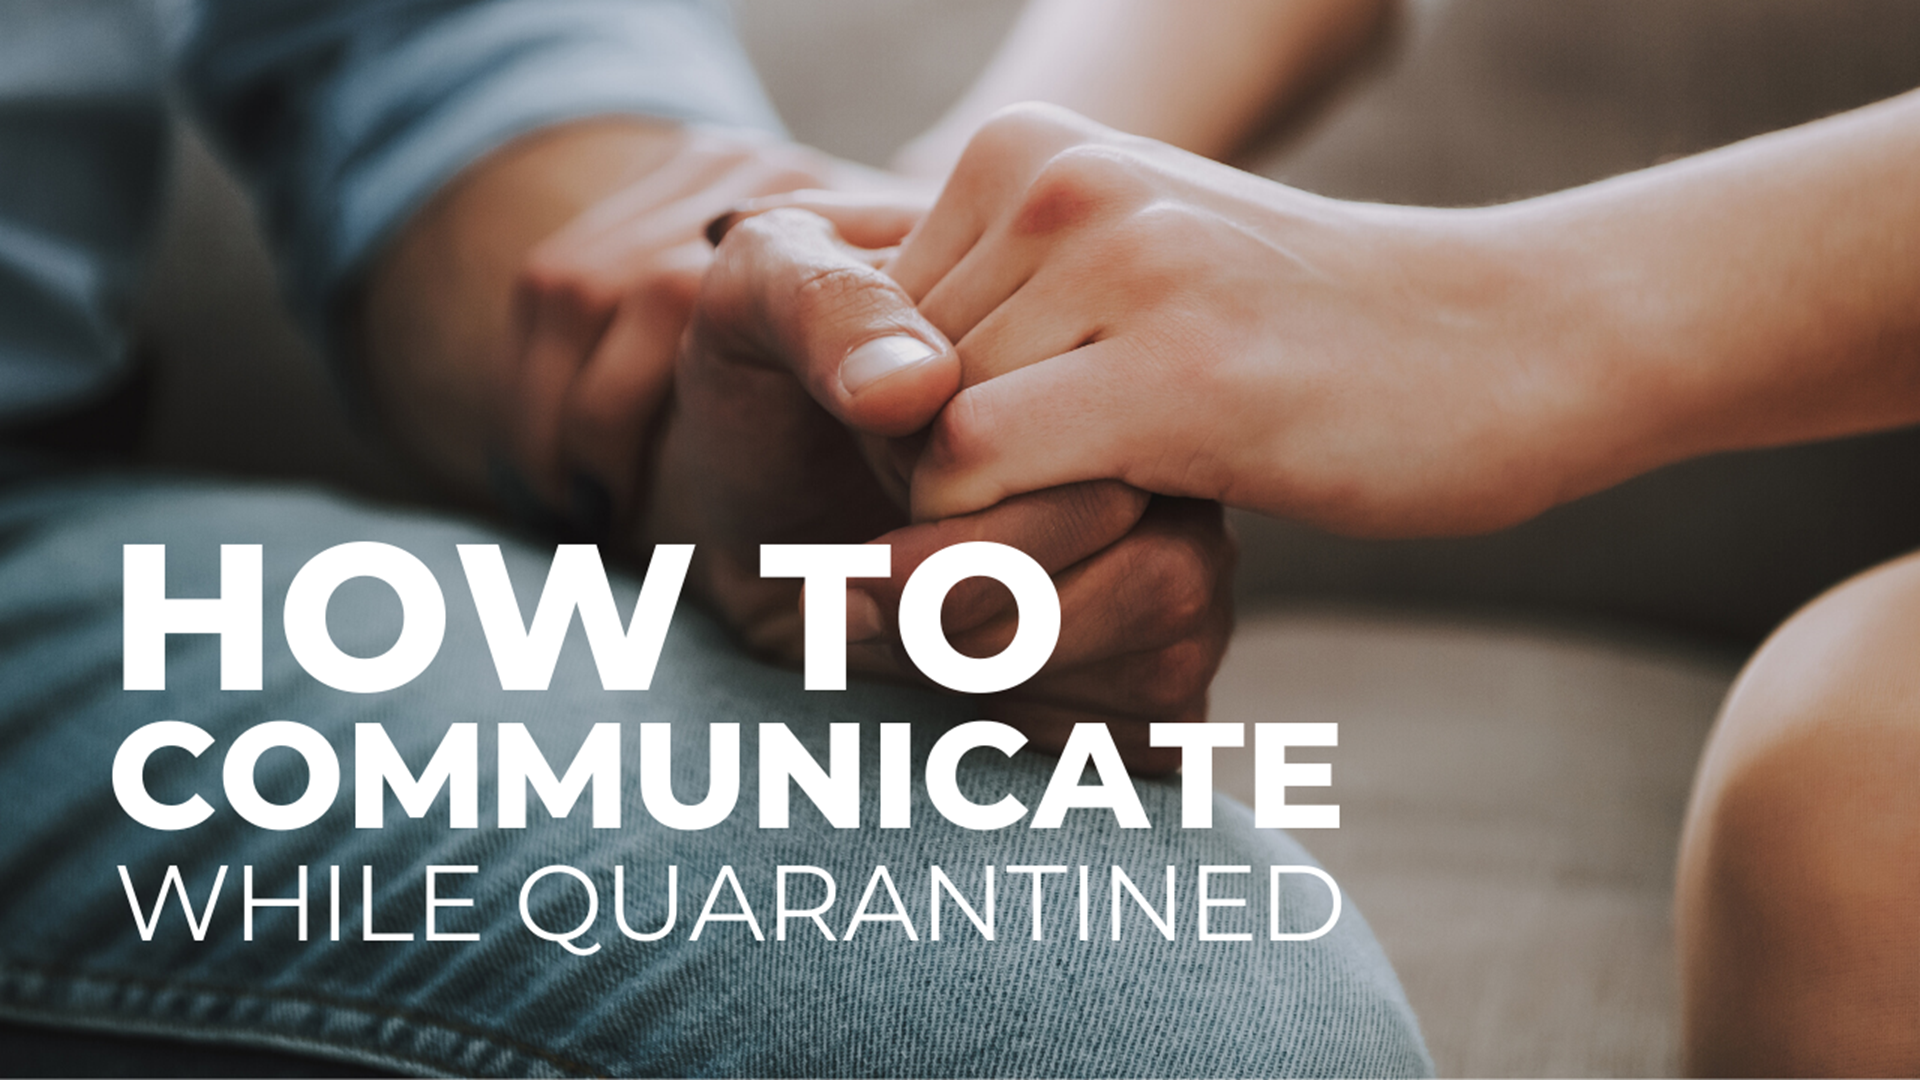 A Portland psychologist gives advice on how you and your partner can communicate effectively while isolated together.